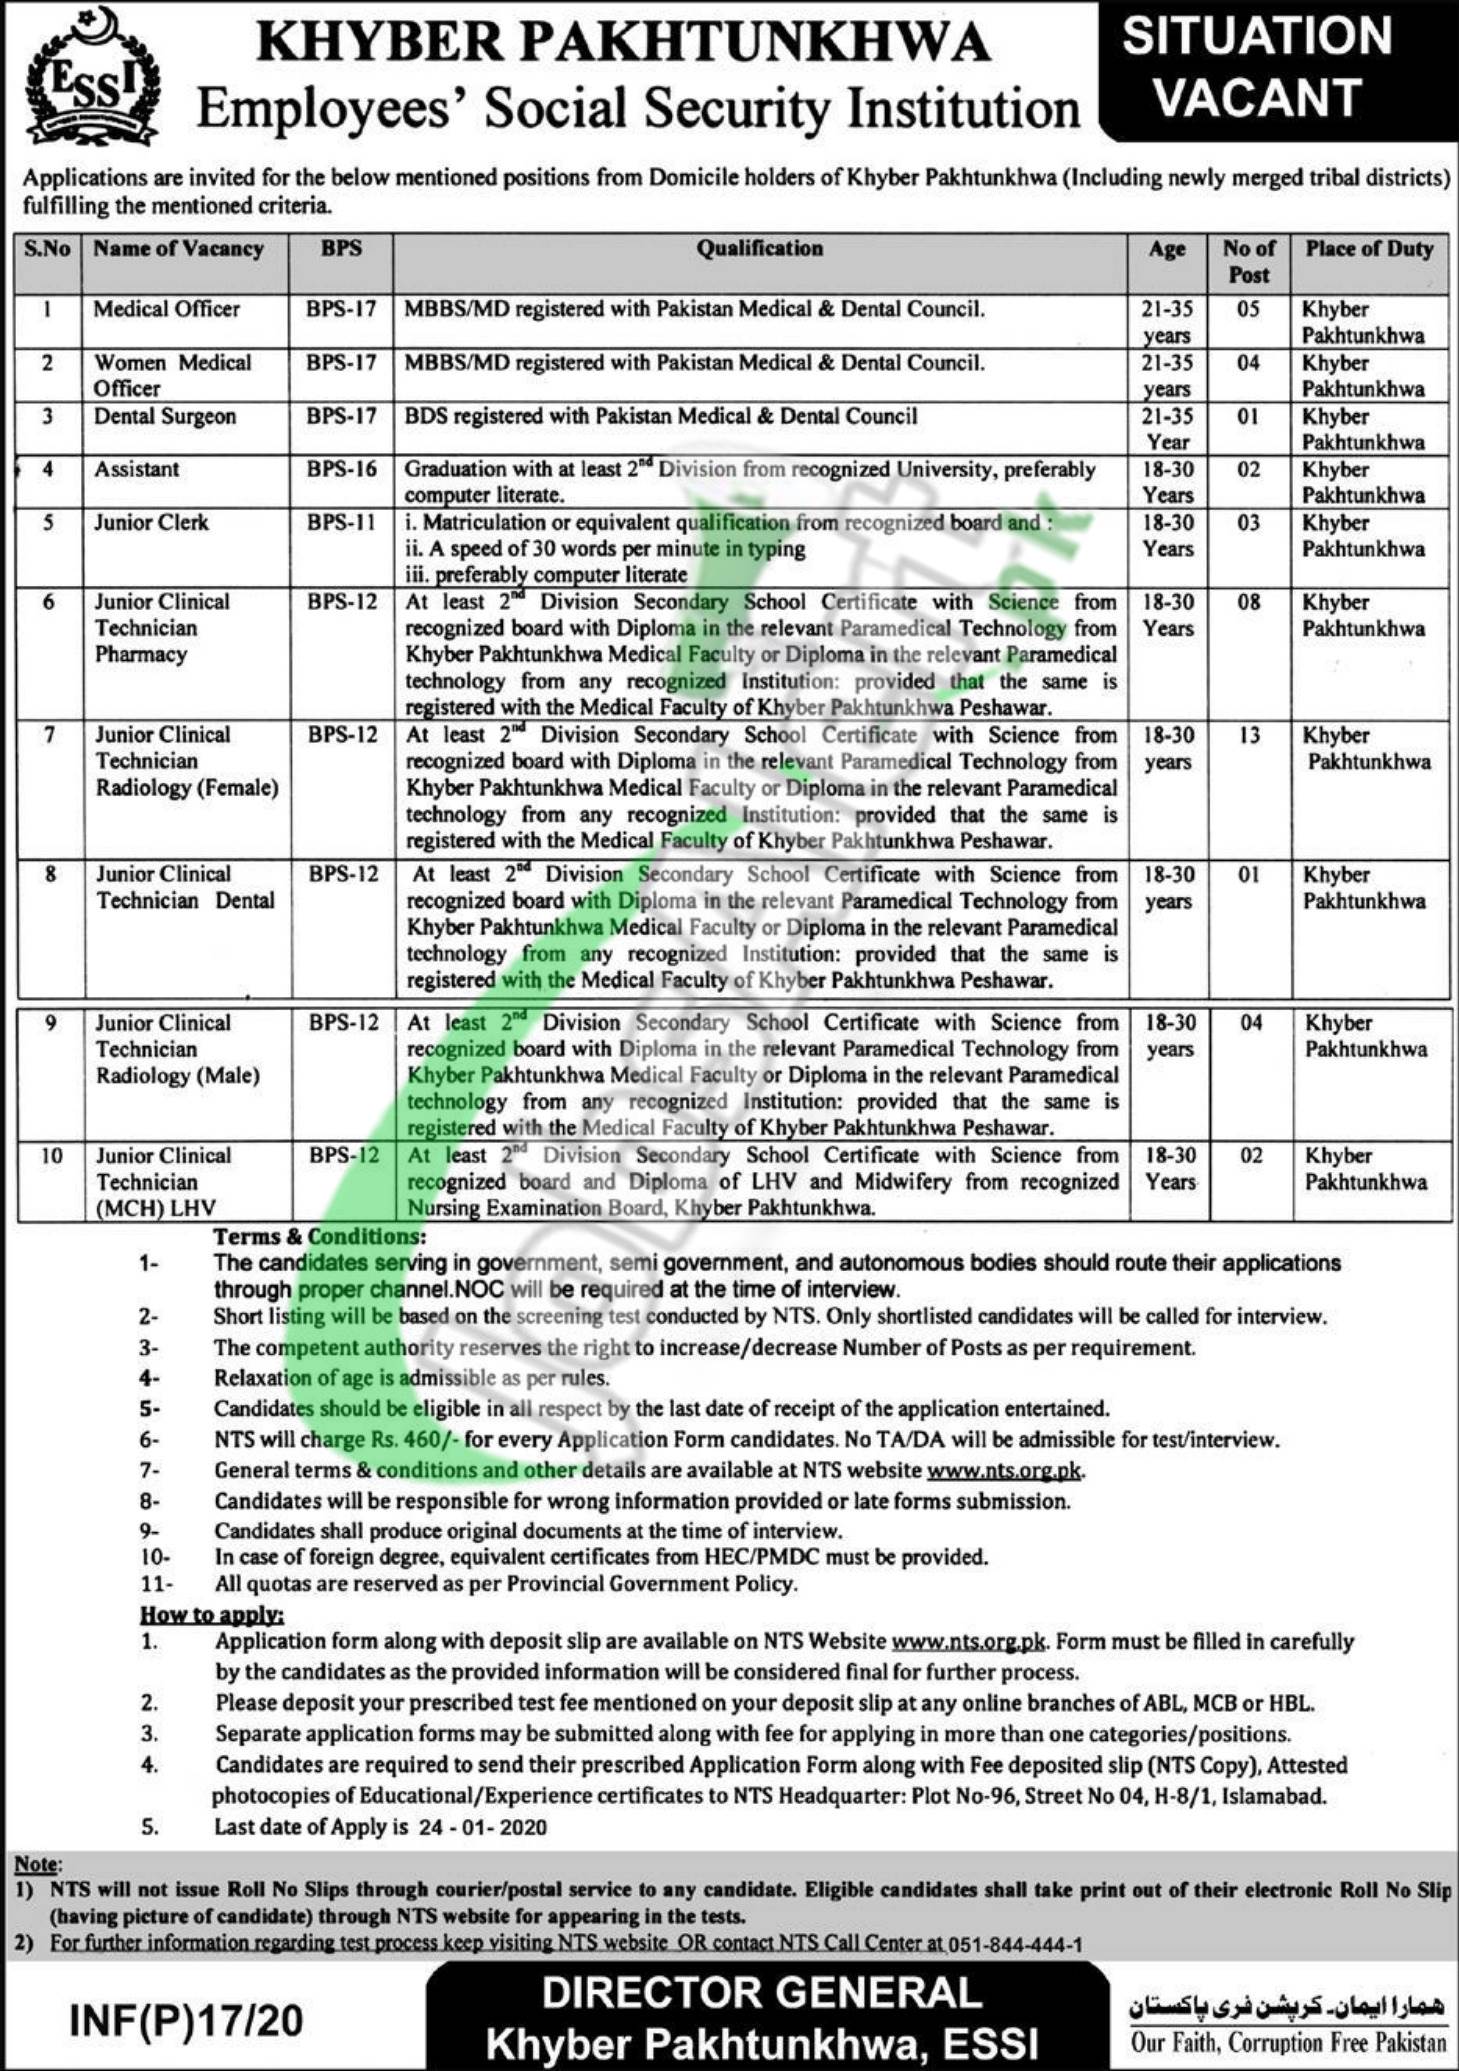 Khyber Pakhtunkhwa Employees Social Security Institution Situation Vacant